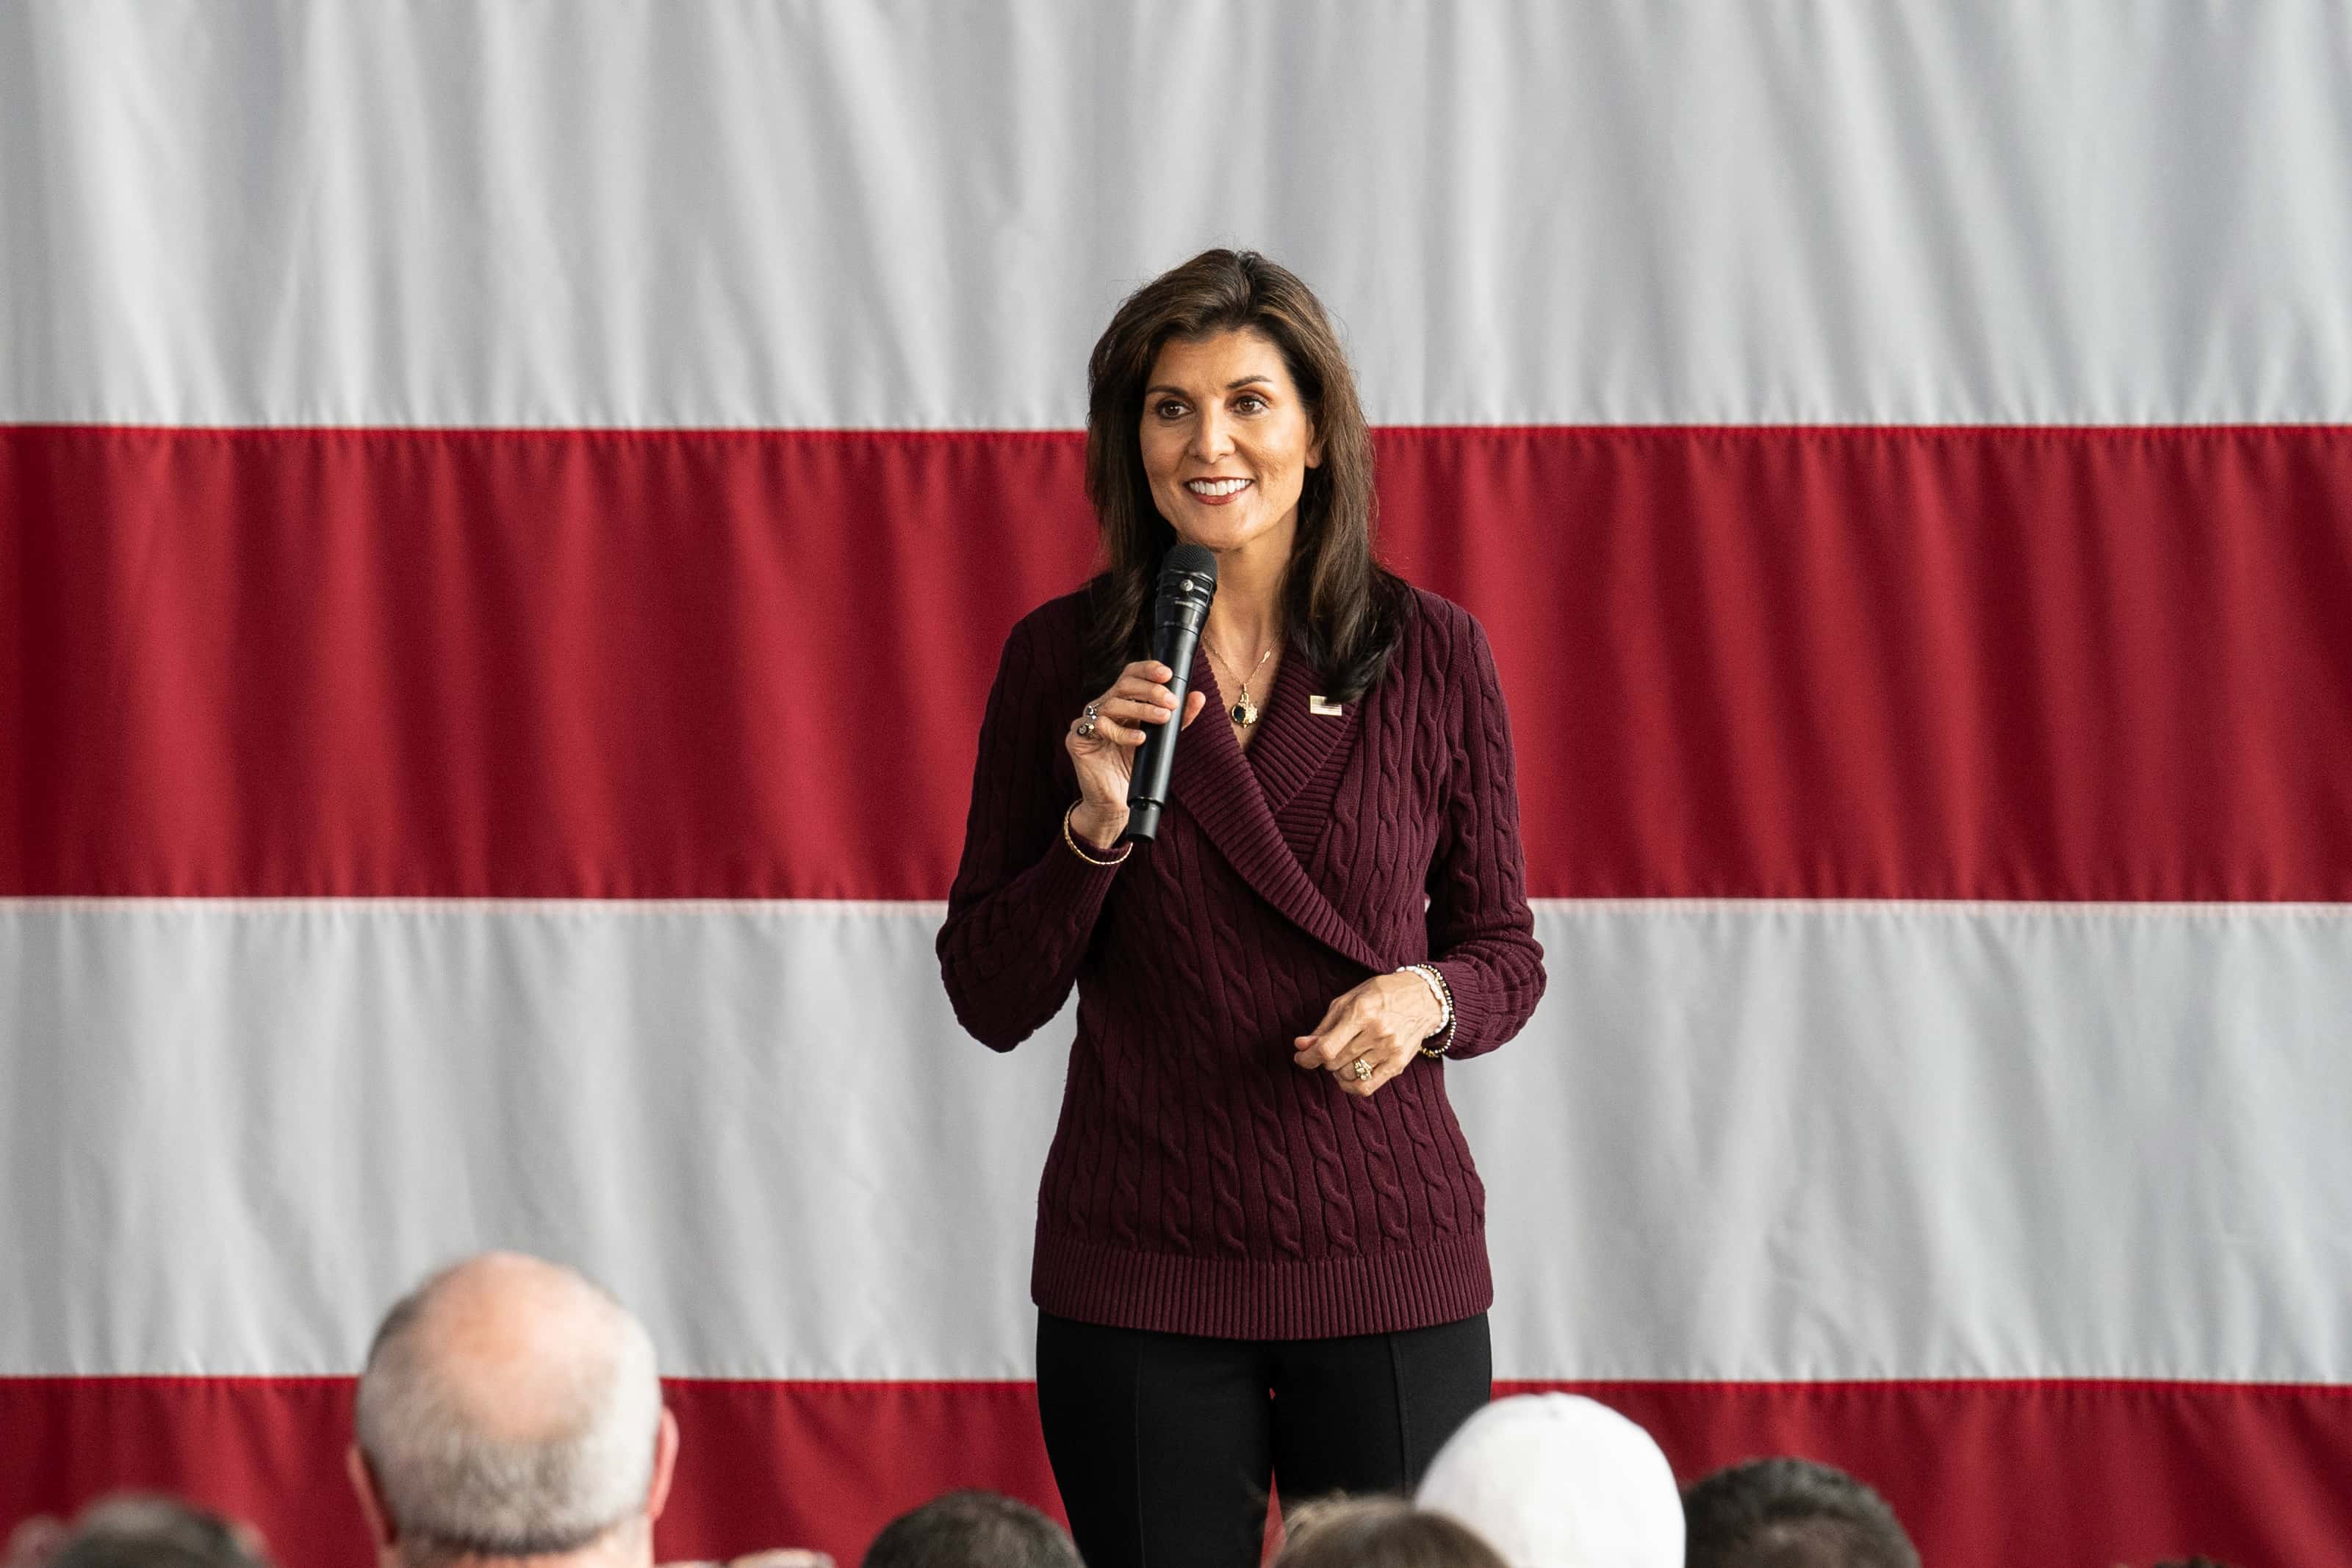 Haley Wins First Primary as Trump Builds Lead in GOP Race